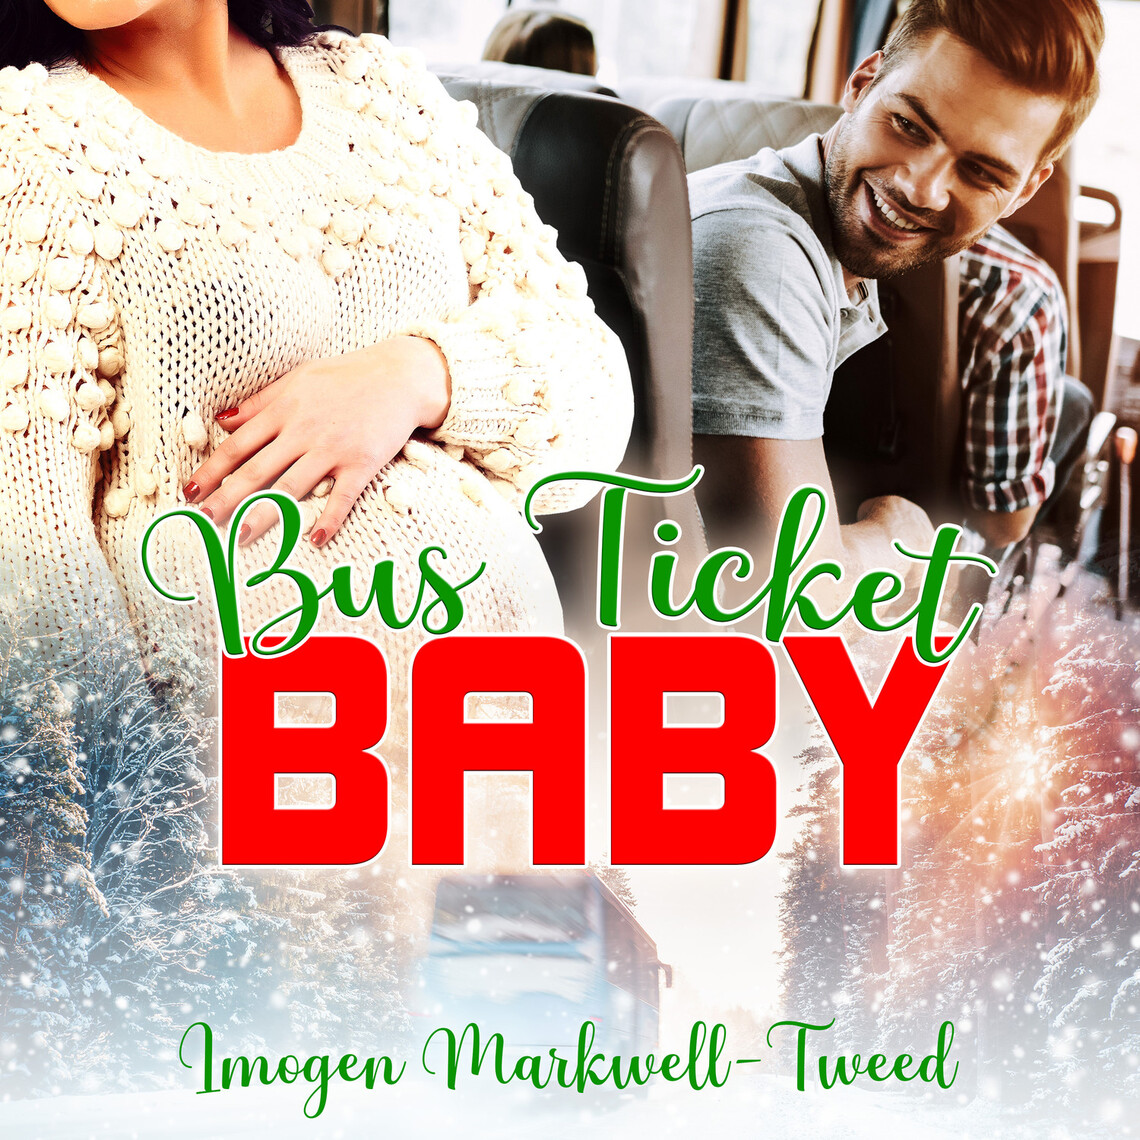 Bus Ticket Baby by Imogen Markwell-Tweed